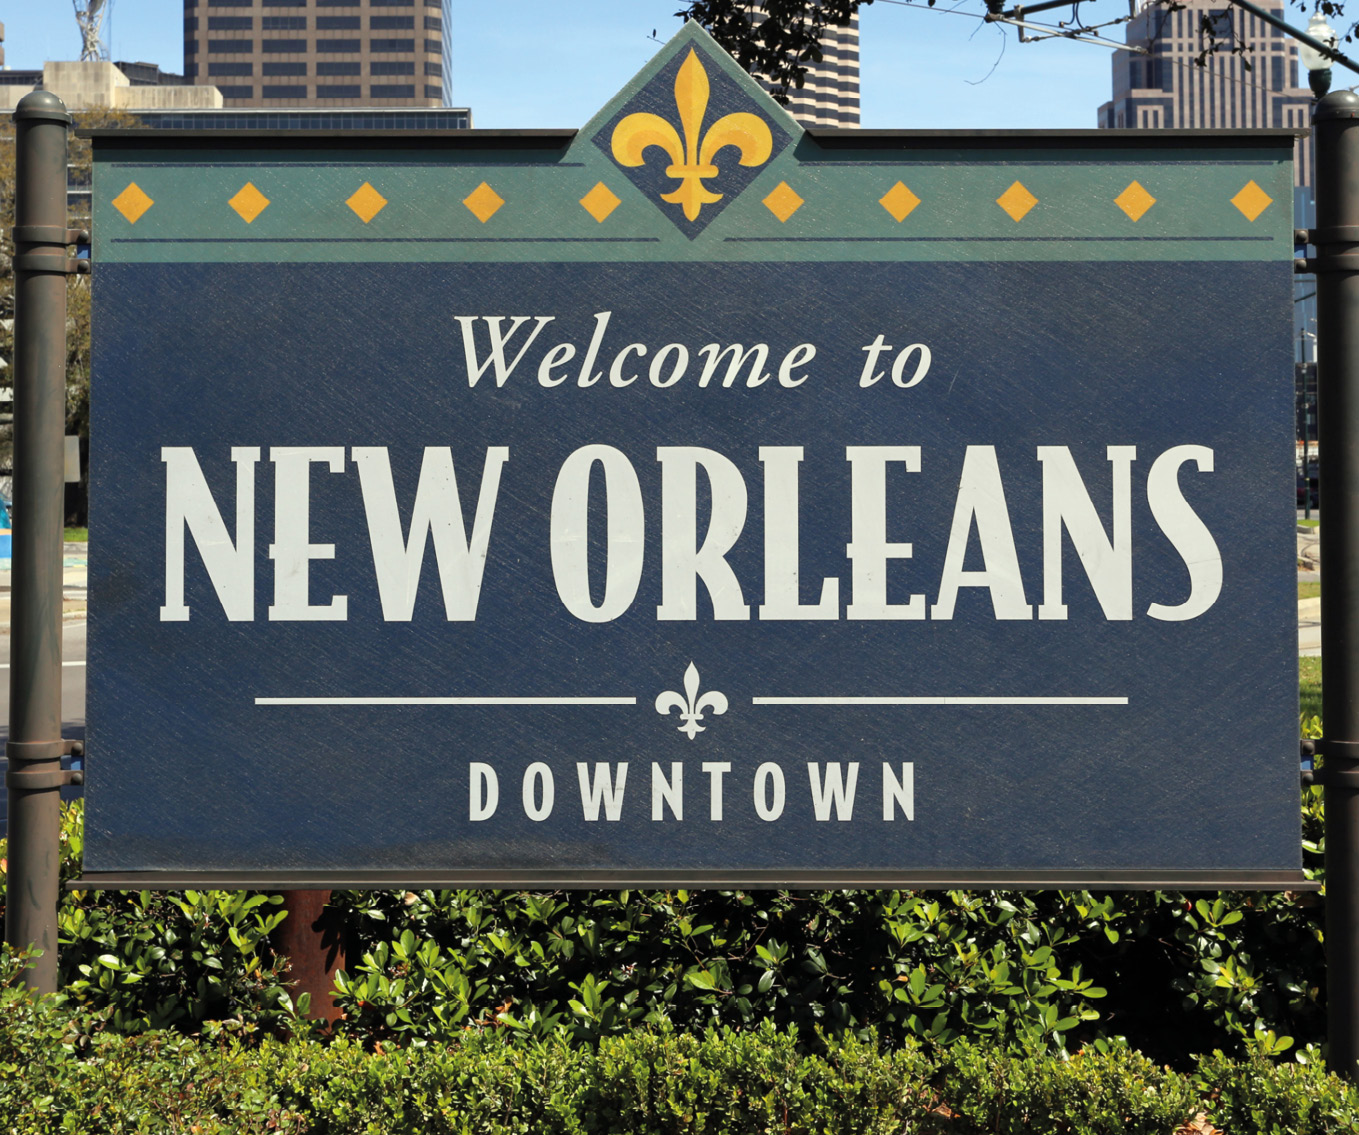 Welcome to downtown New Orleans.